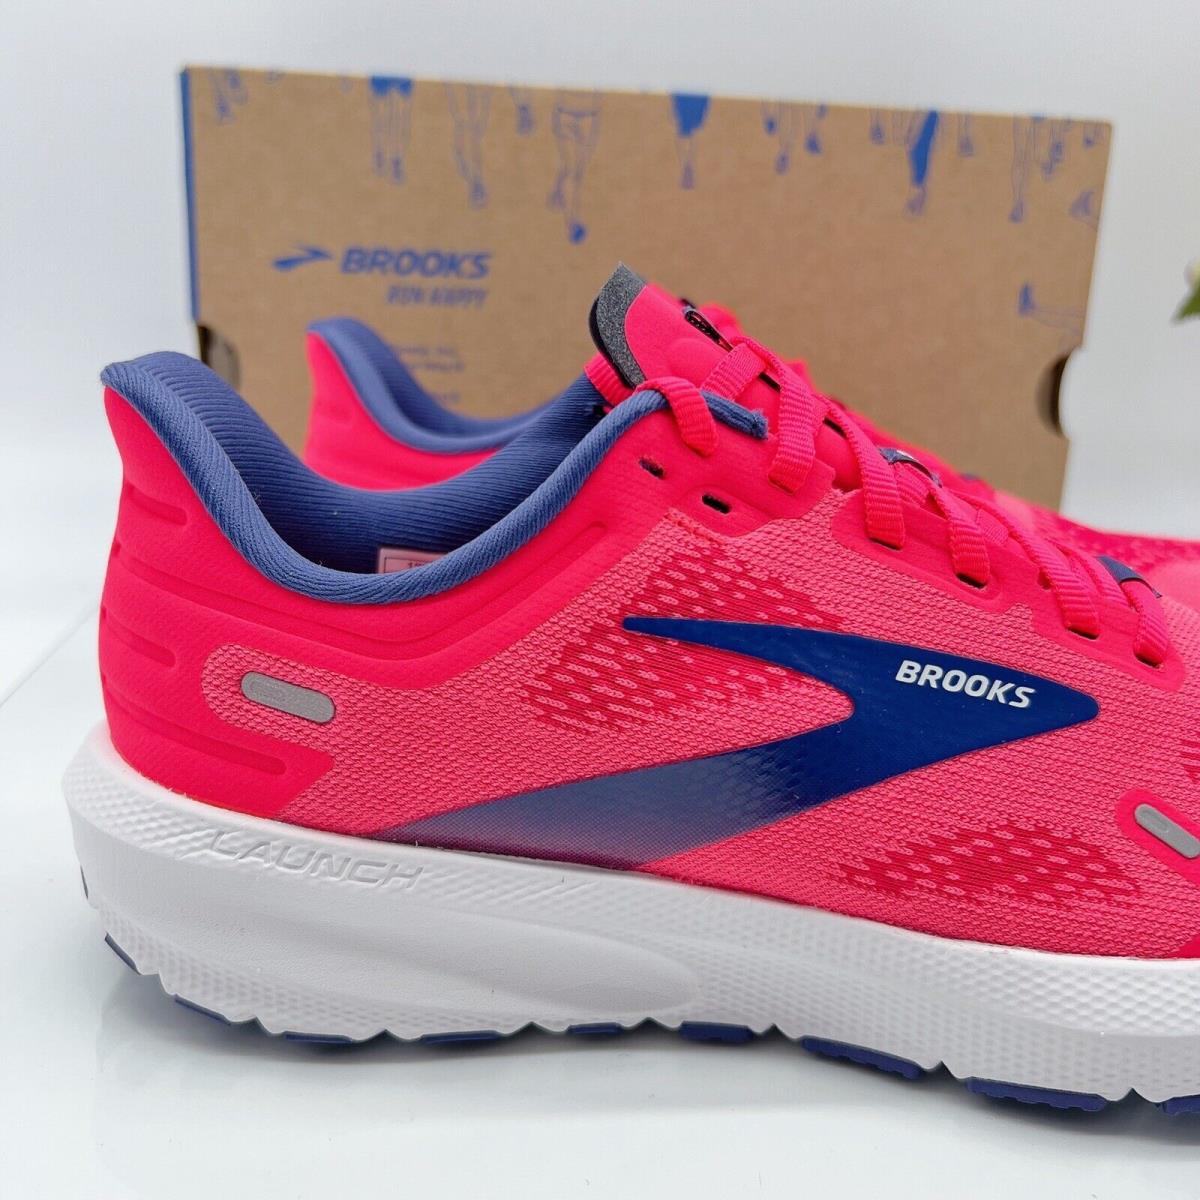 Brooks shoes Launch - Pink 3